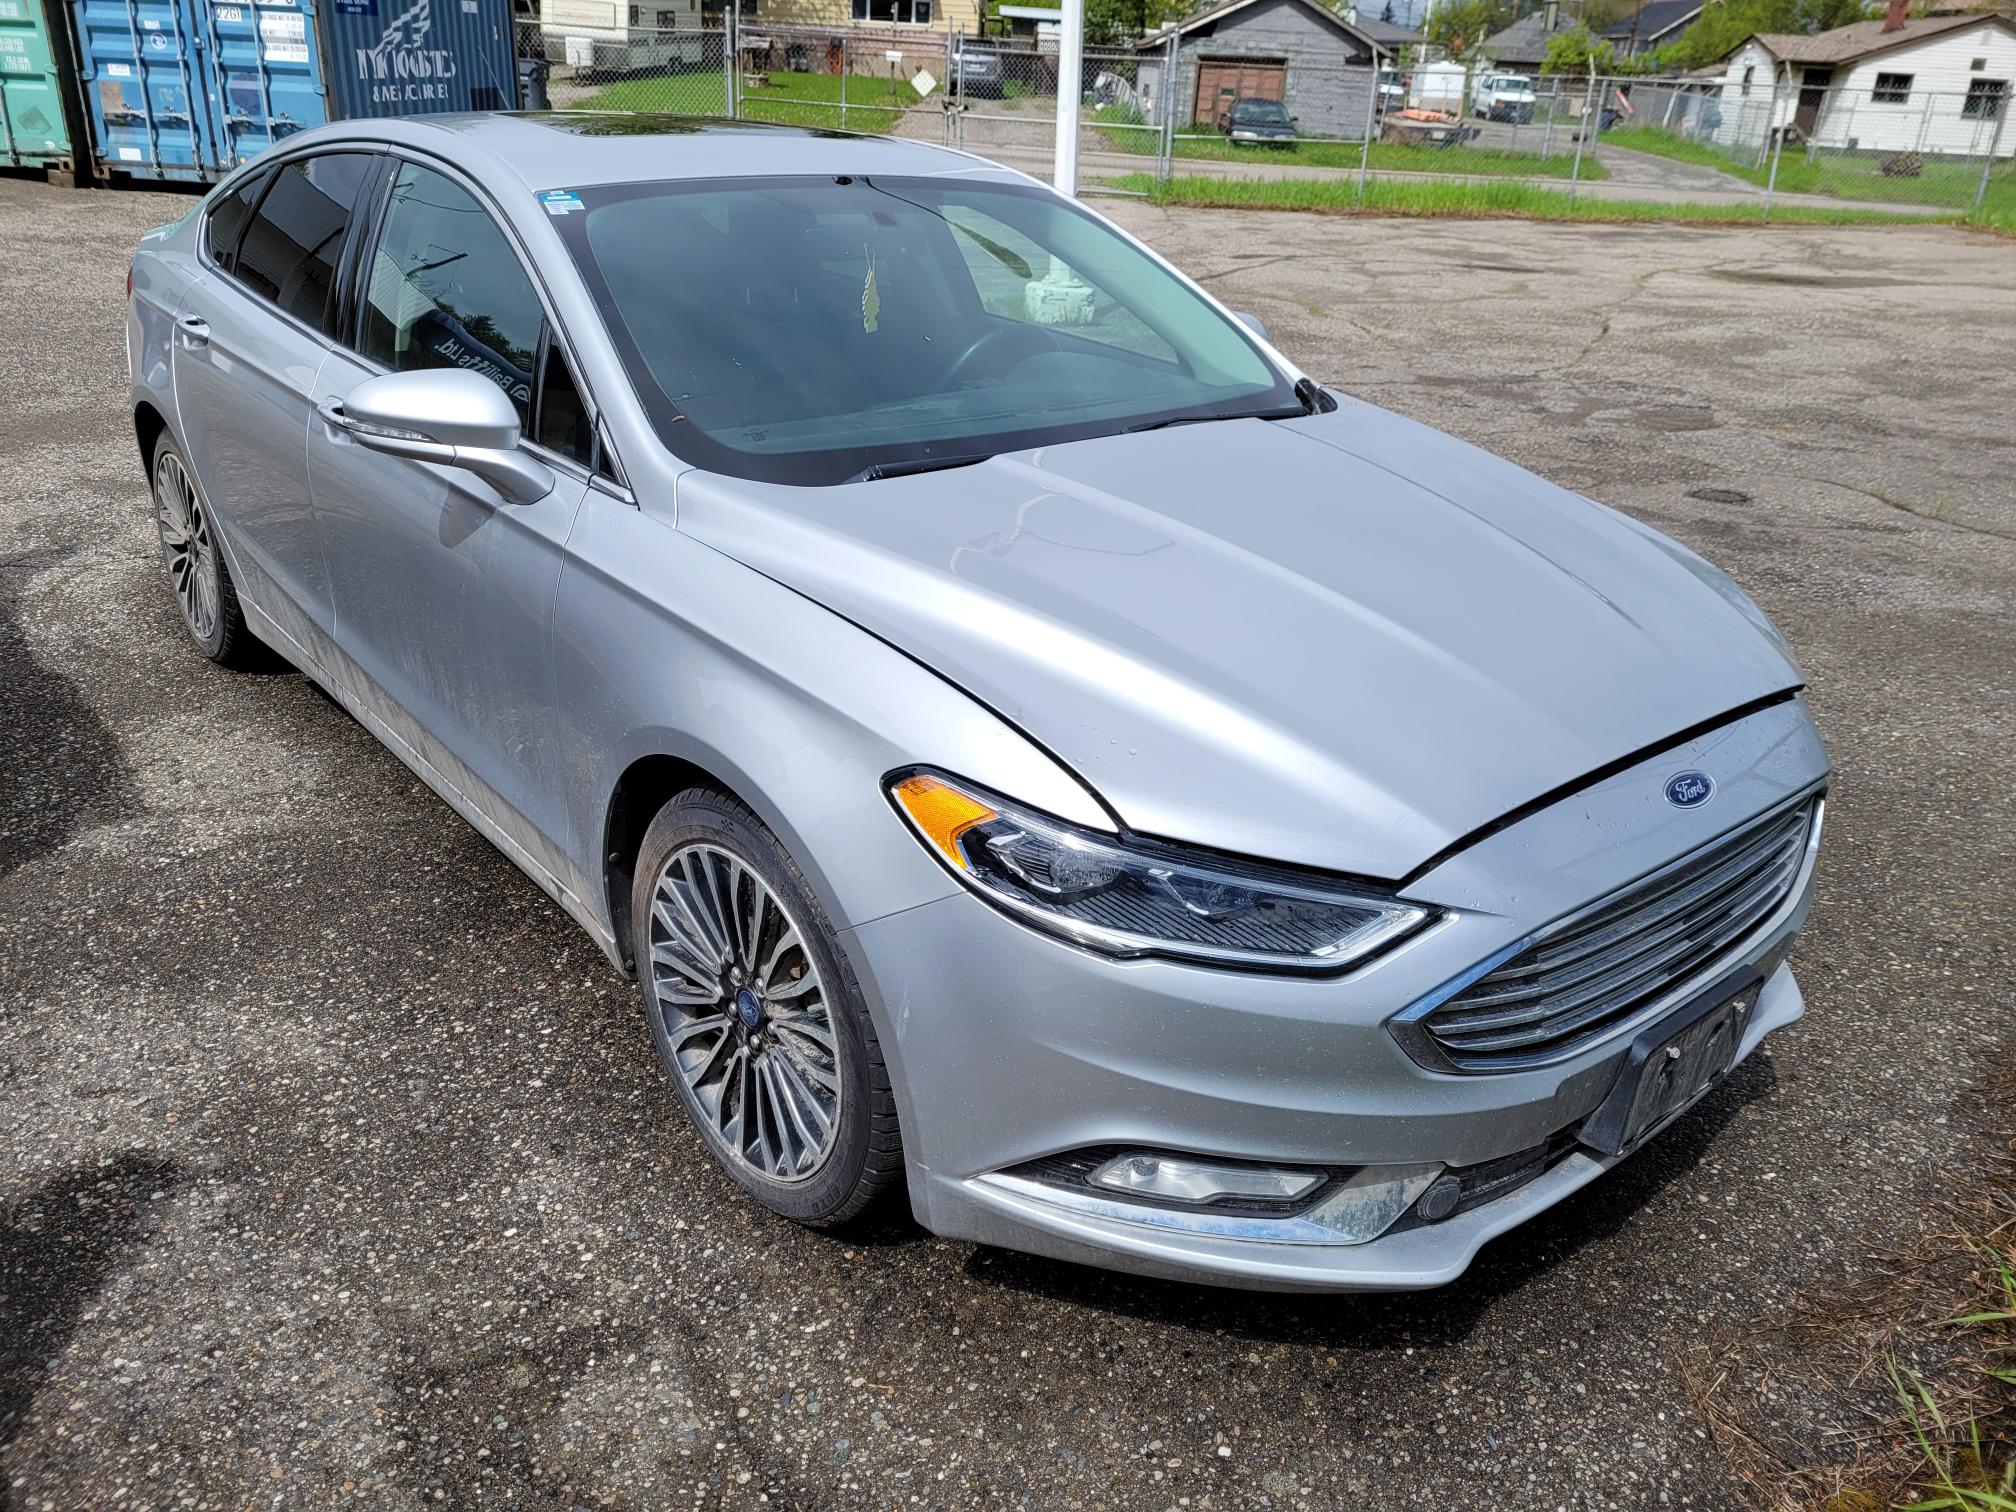 2017 Ford Fusion SE AWD #B-PG-0605 Re-listed Located in Prince George